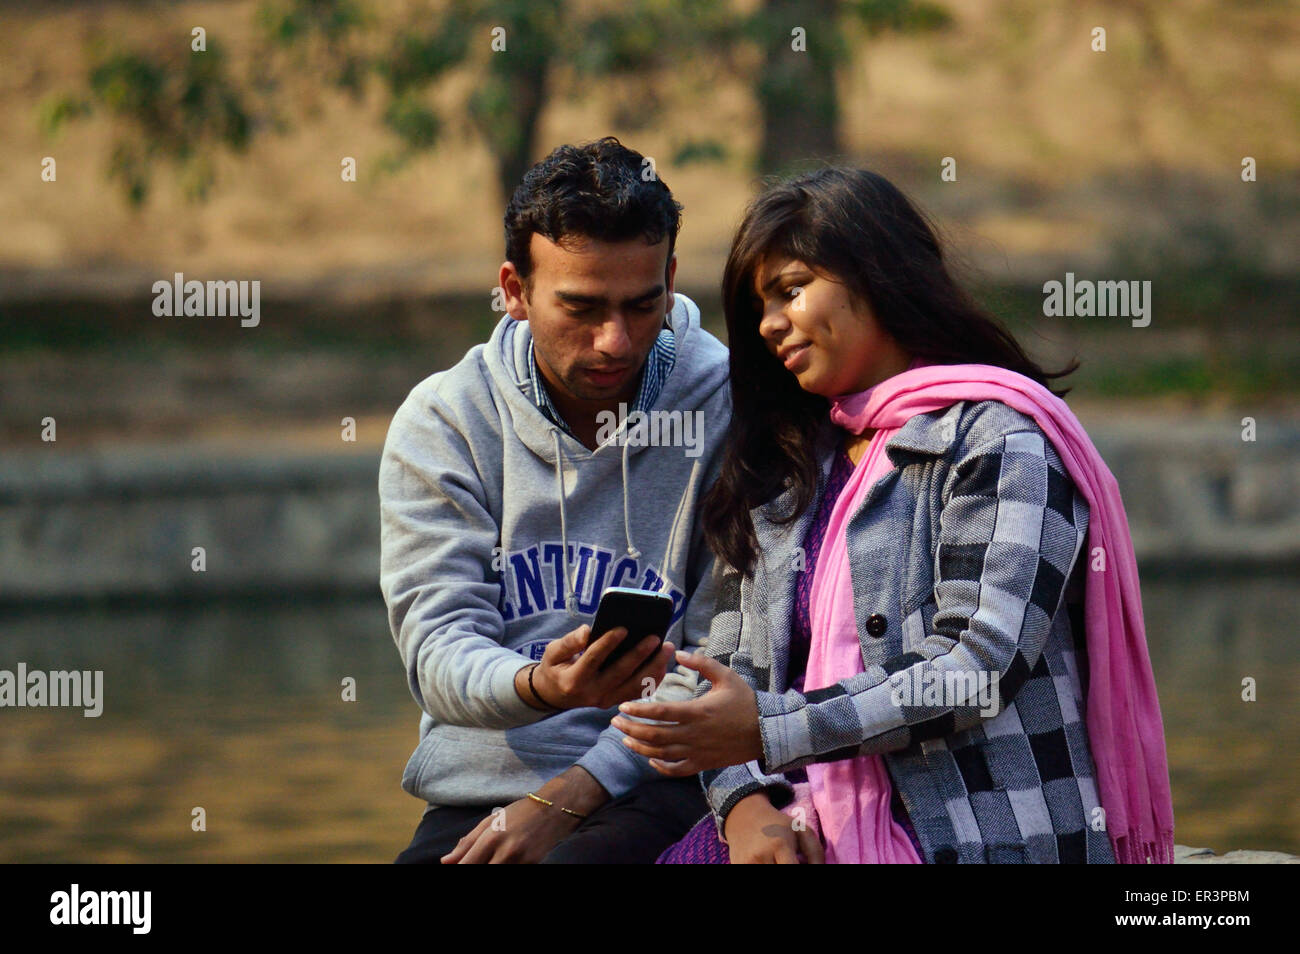 Smart phones camera phones Iphones and Ipads world over have made masses as  photo enthusiasts, young couple taking selfie Stock Photo